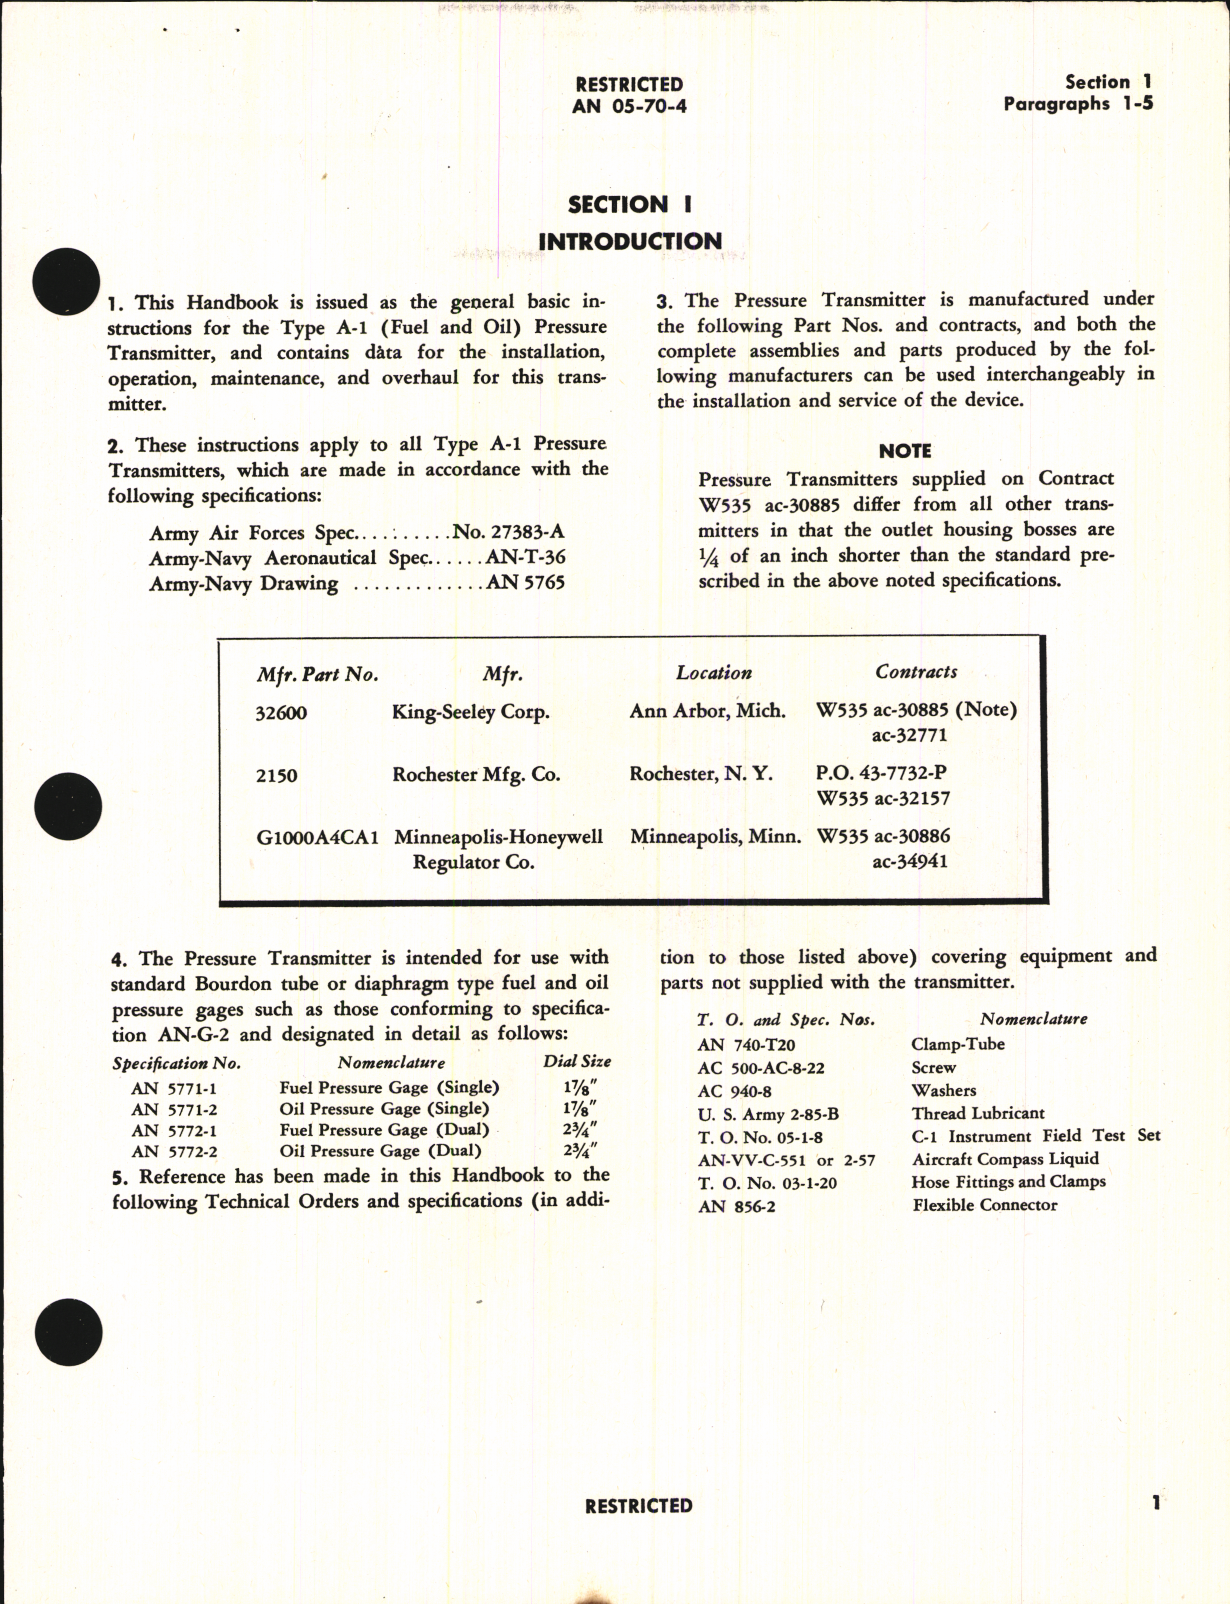 Sample page 7 from AirCorps Library document: Handbook of Instructions with Parts Catalog for Type A-1 Pressure Transmitter (Fuel & Oil)